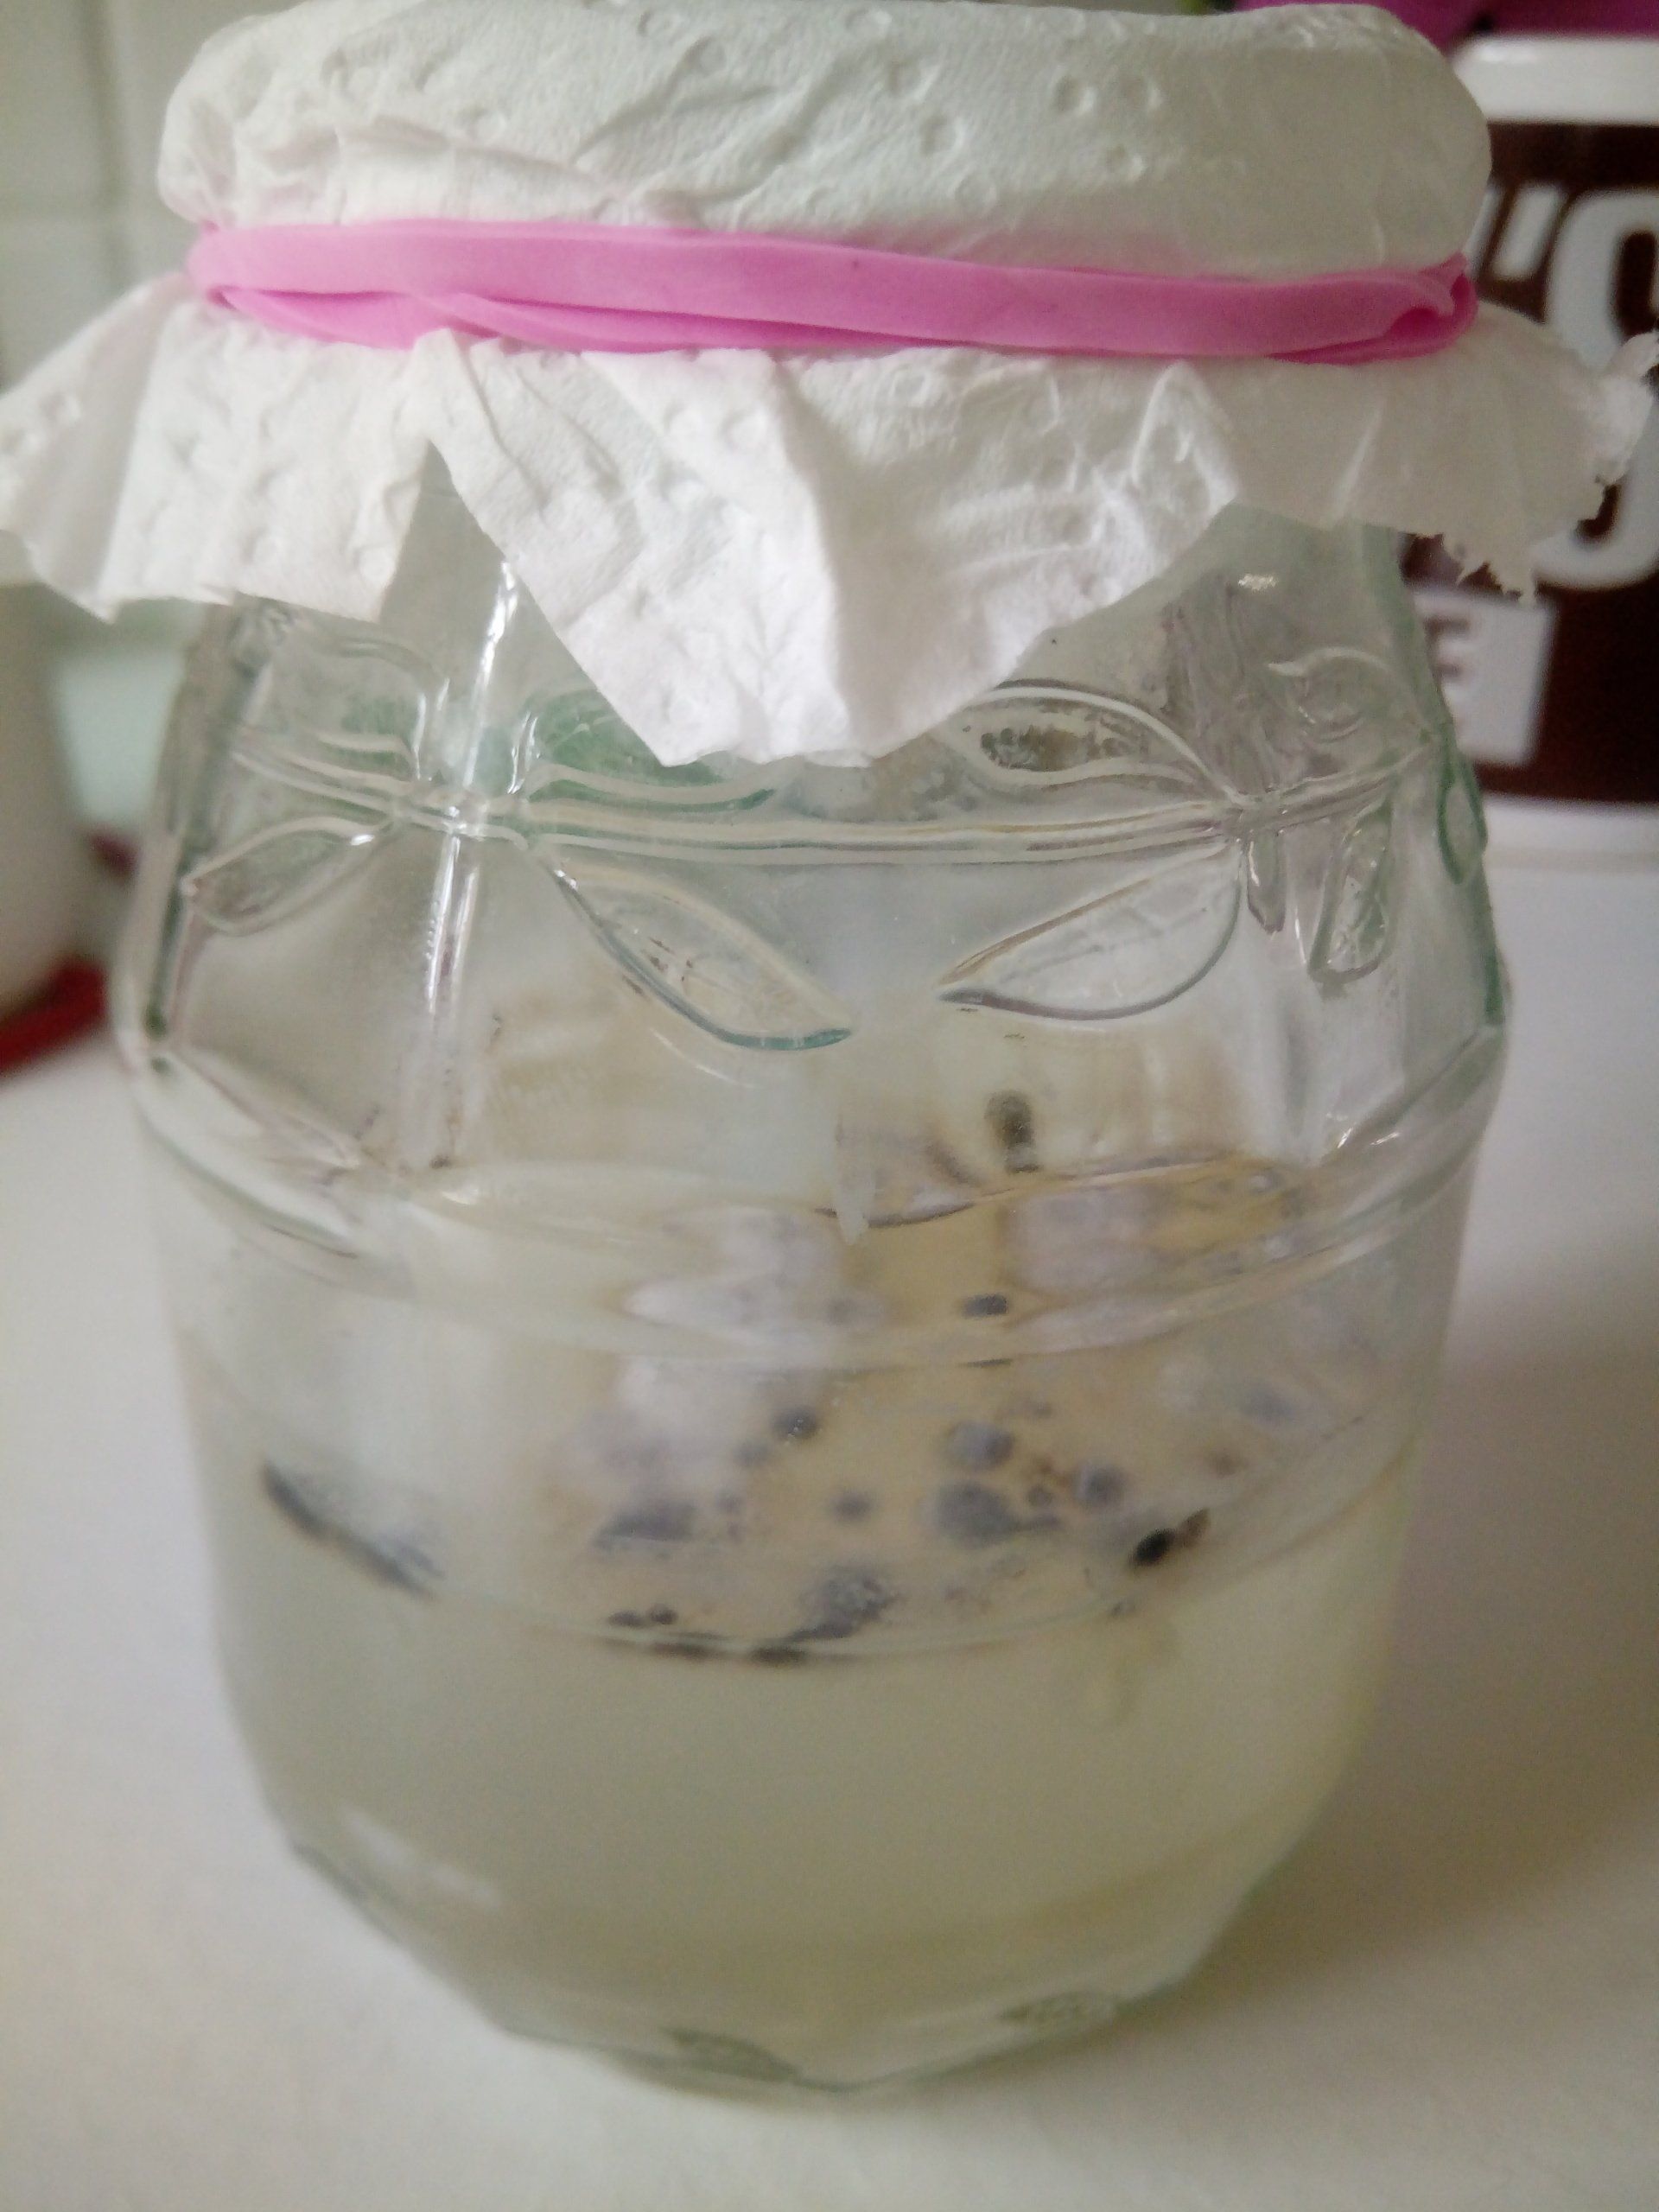 Fermenting Cucamelon Seeds in a Jar covered with a Kitchen Towel Lid